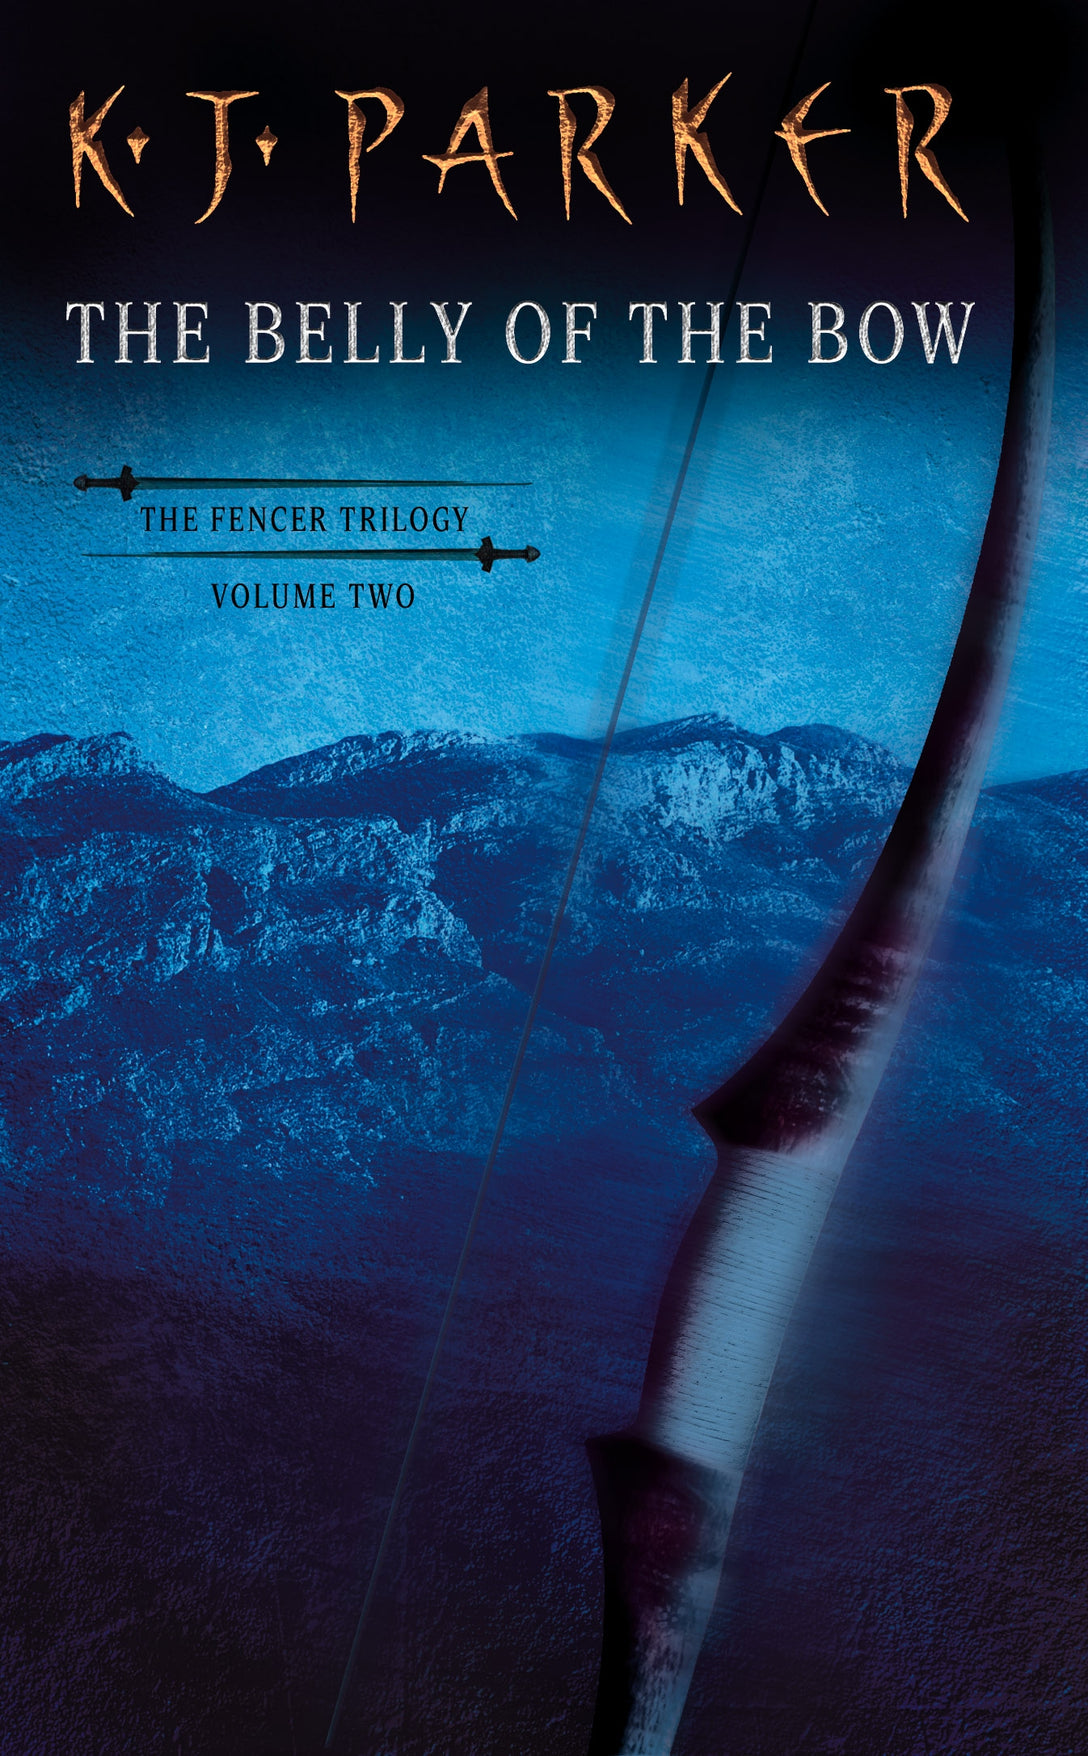 The Belly Of The Bow by K. J. Parker